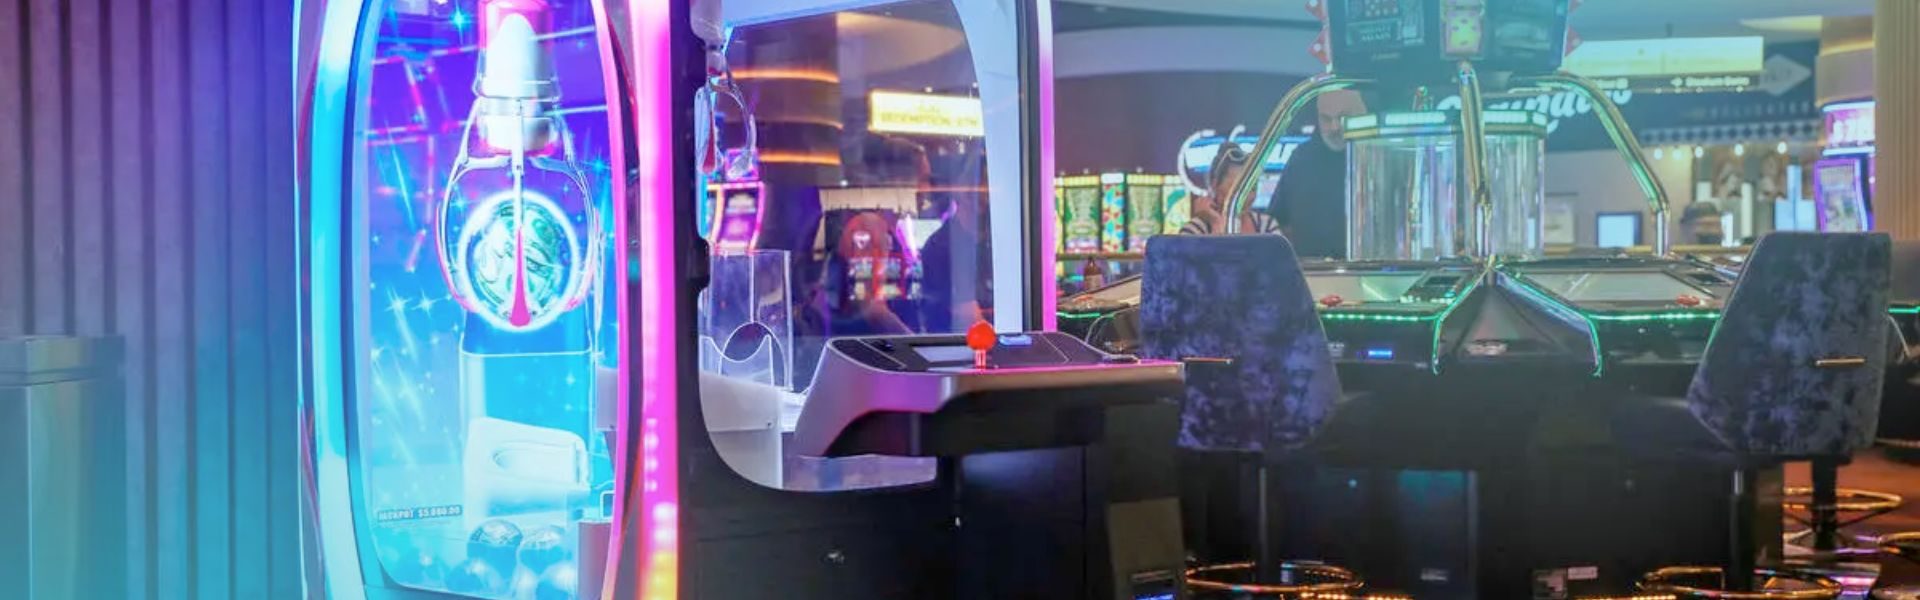 Top Casino Arcade Games For Instant Fun And Wins 